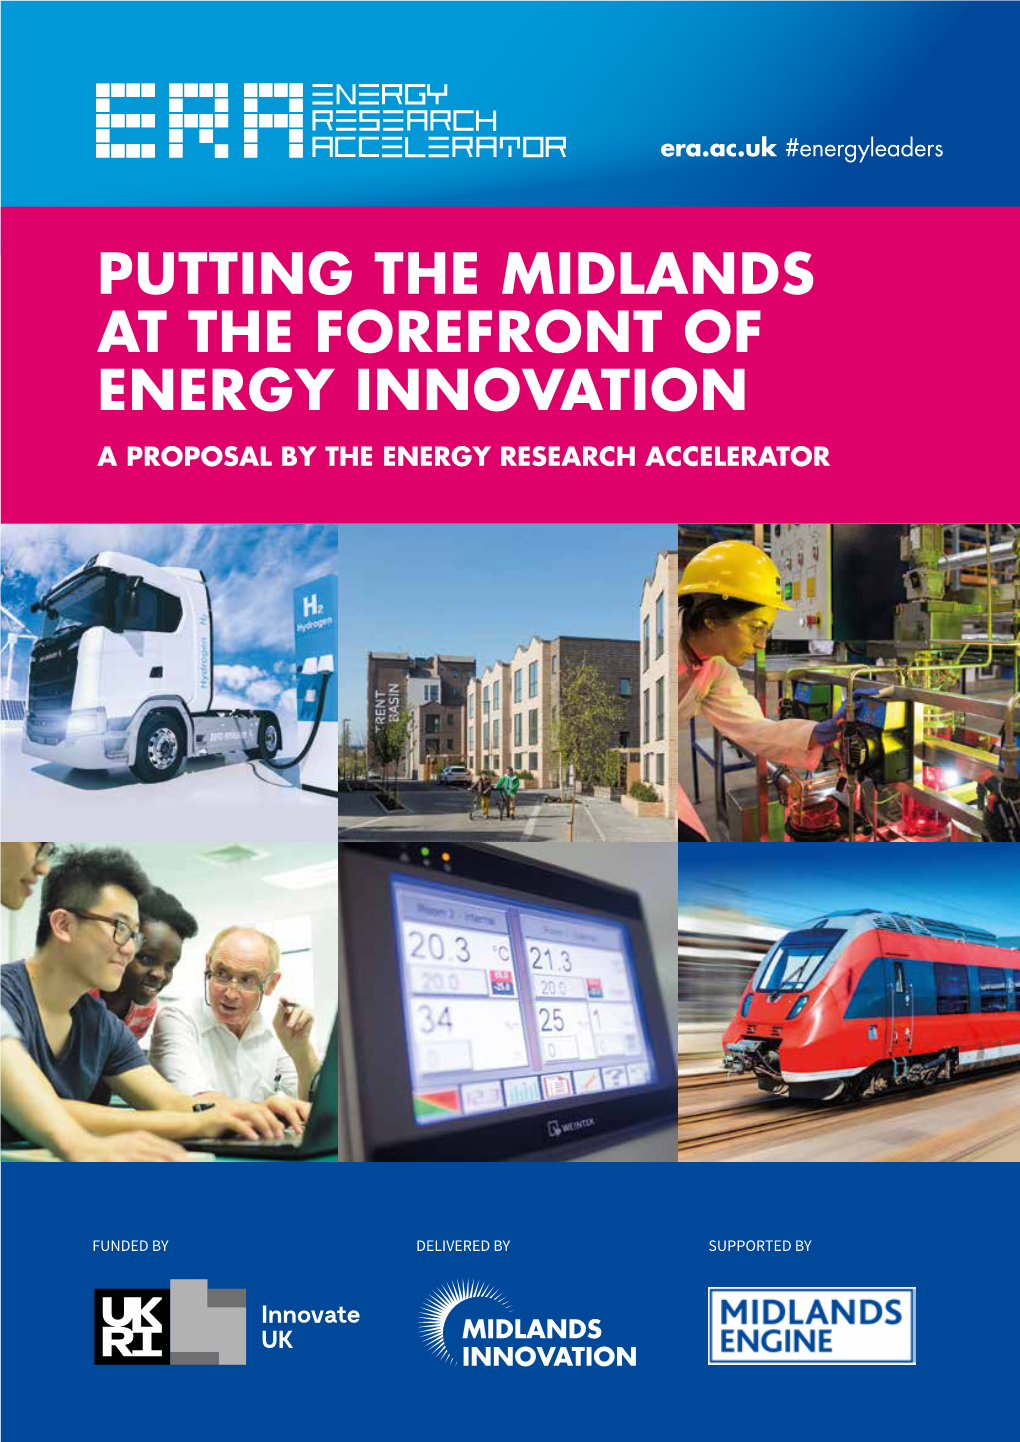 Putting the Midlands at the Forefront of Energy Innovation a Proposal by the Energy Research Accelerator